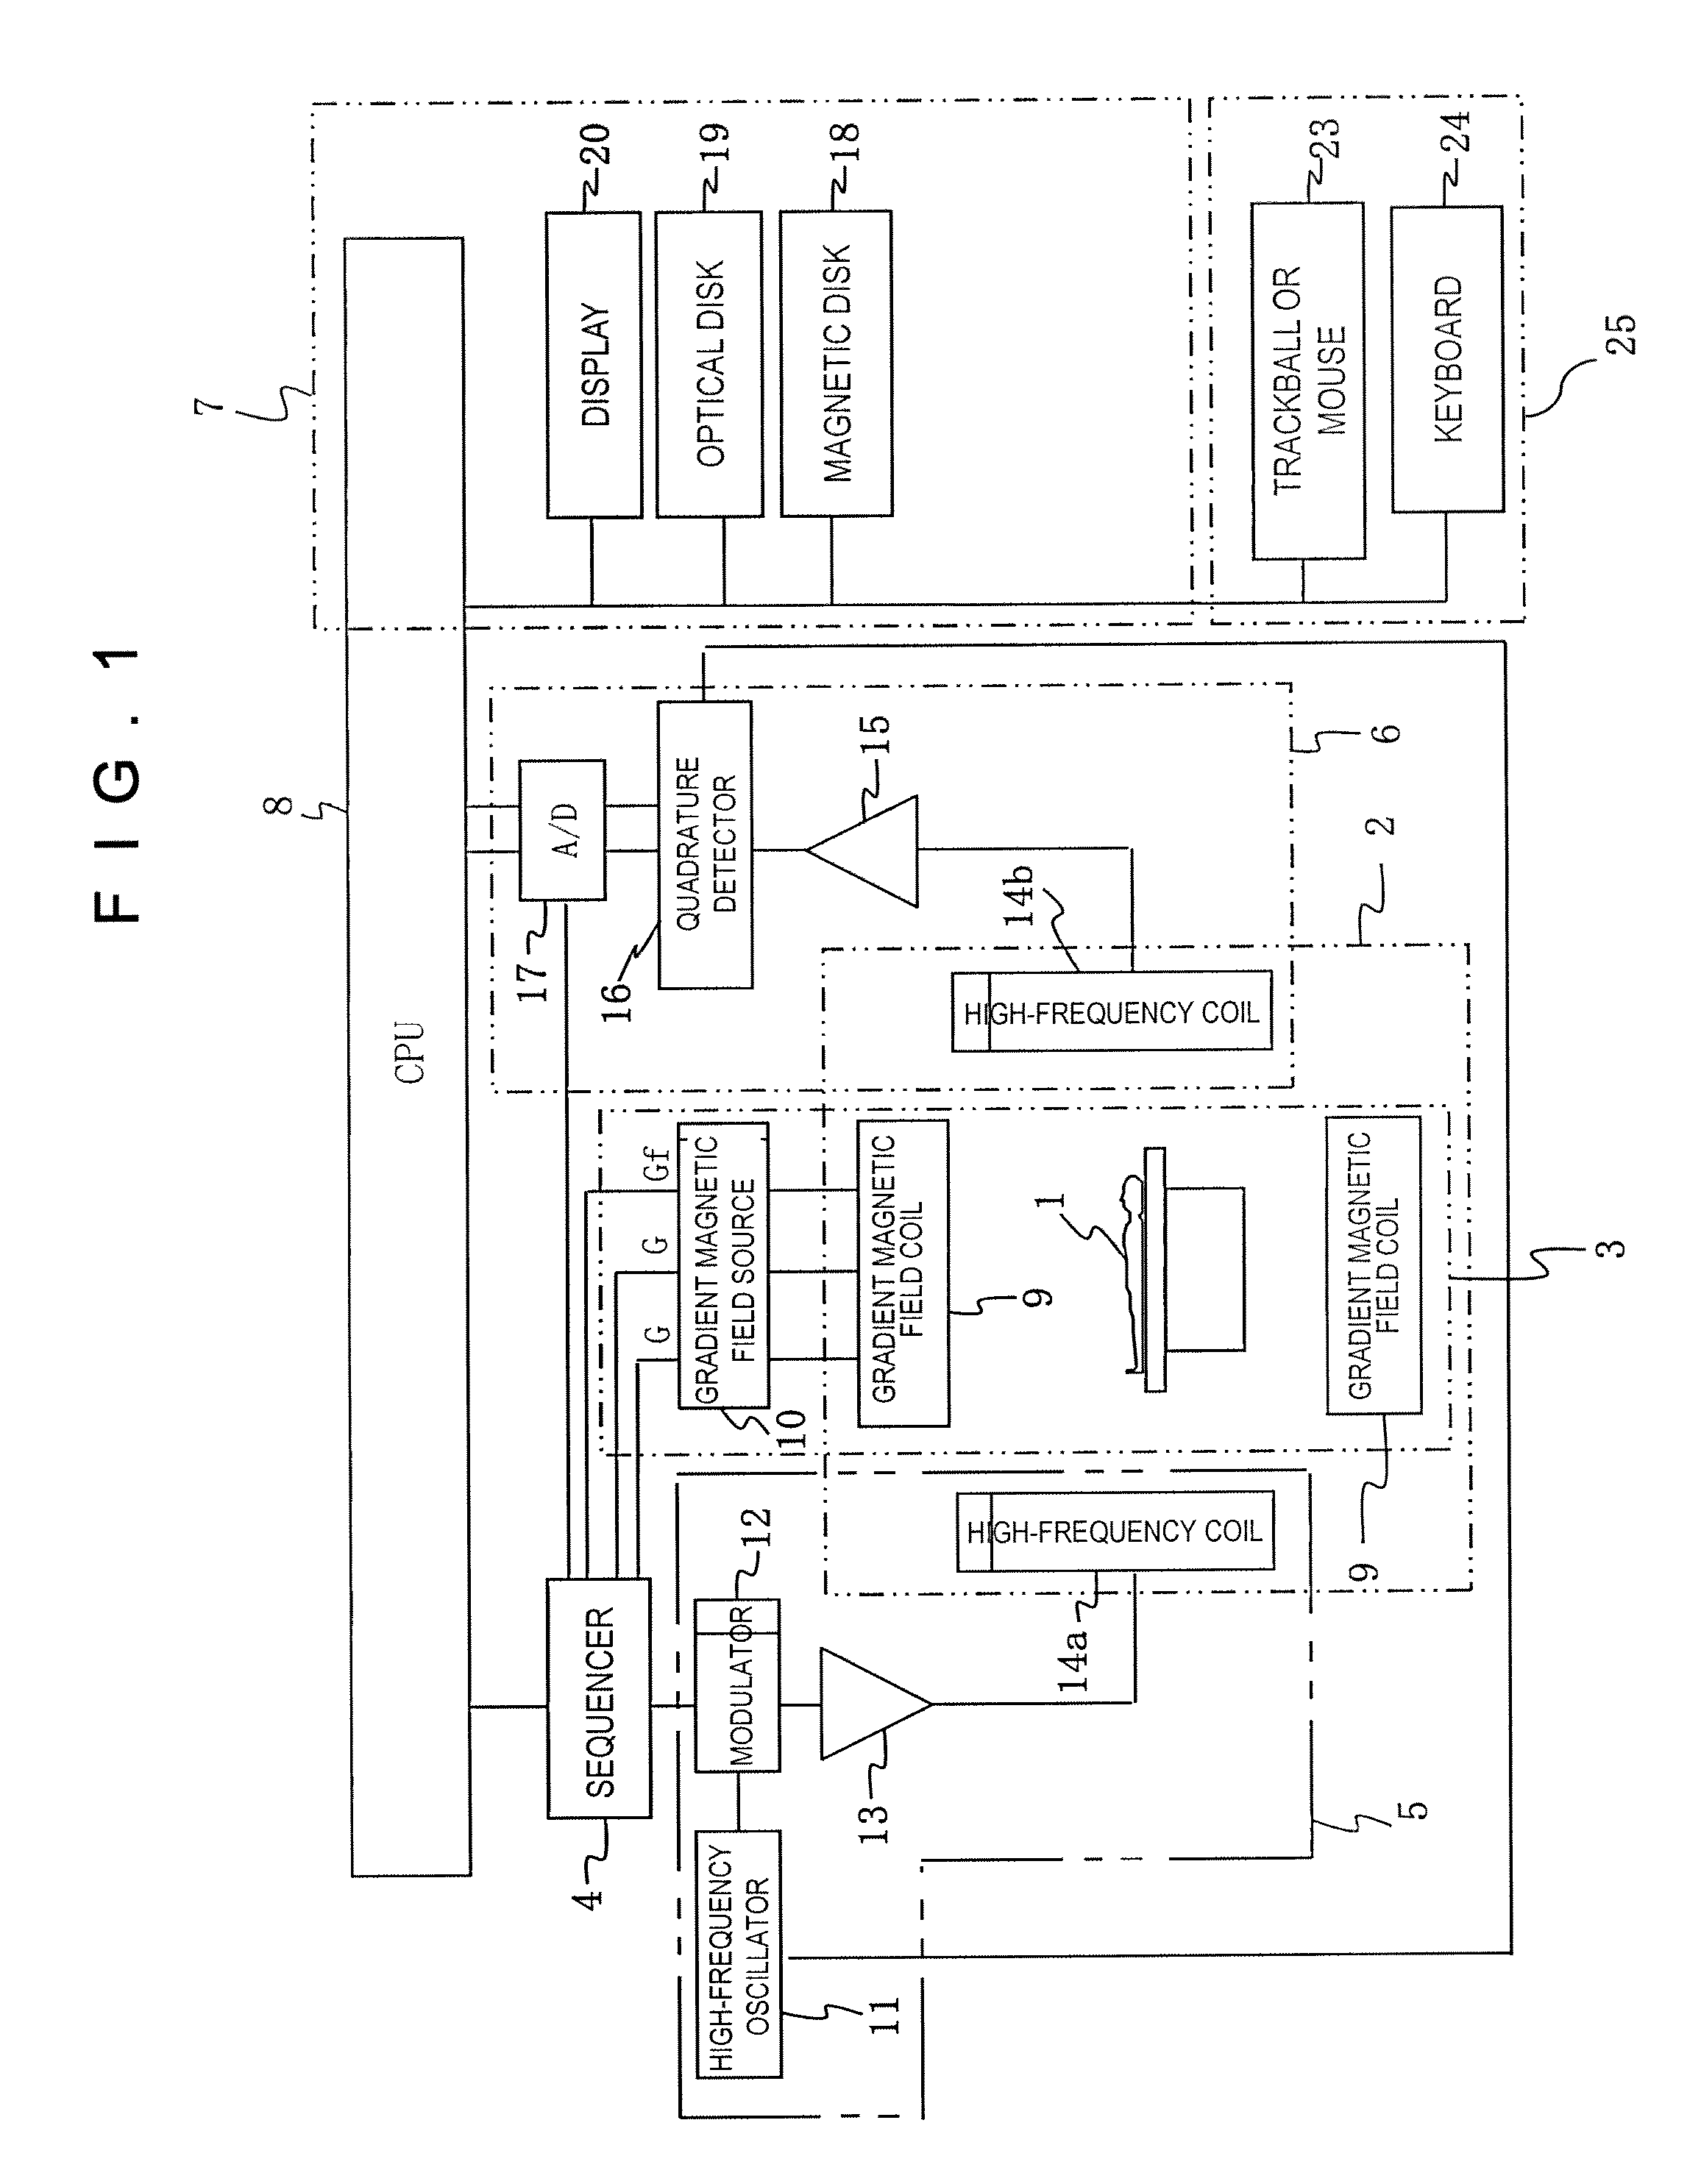 Magnetic resonance imaging apparatus and method configured for susceptibility-emphasized imaging with improved signal-to-noise ratio